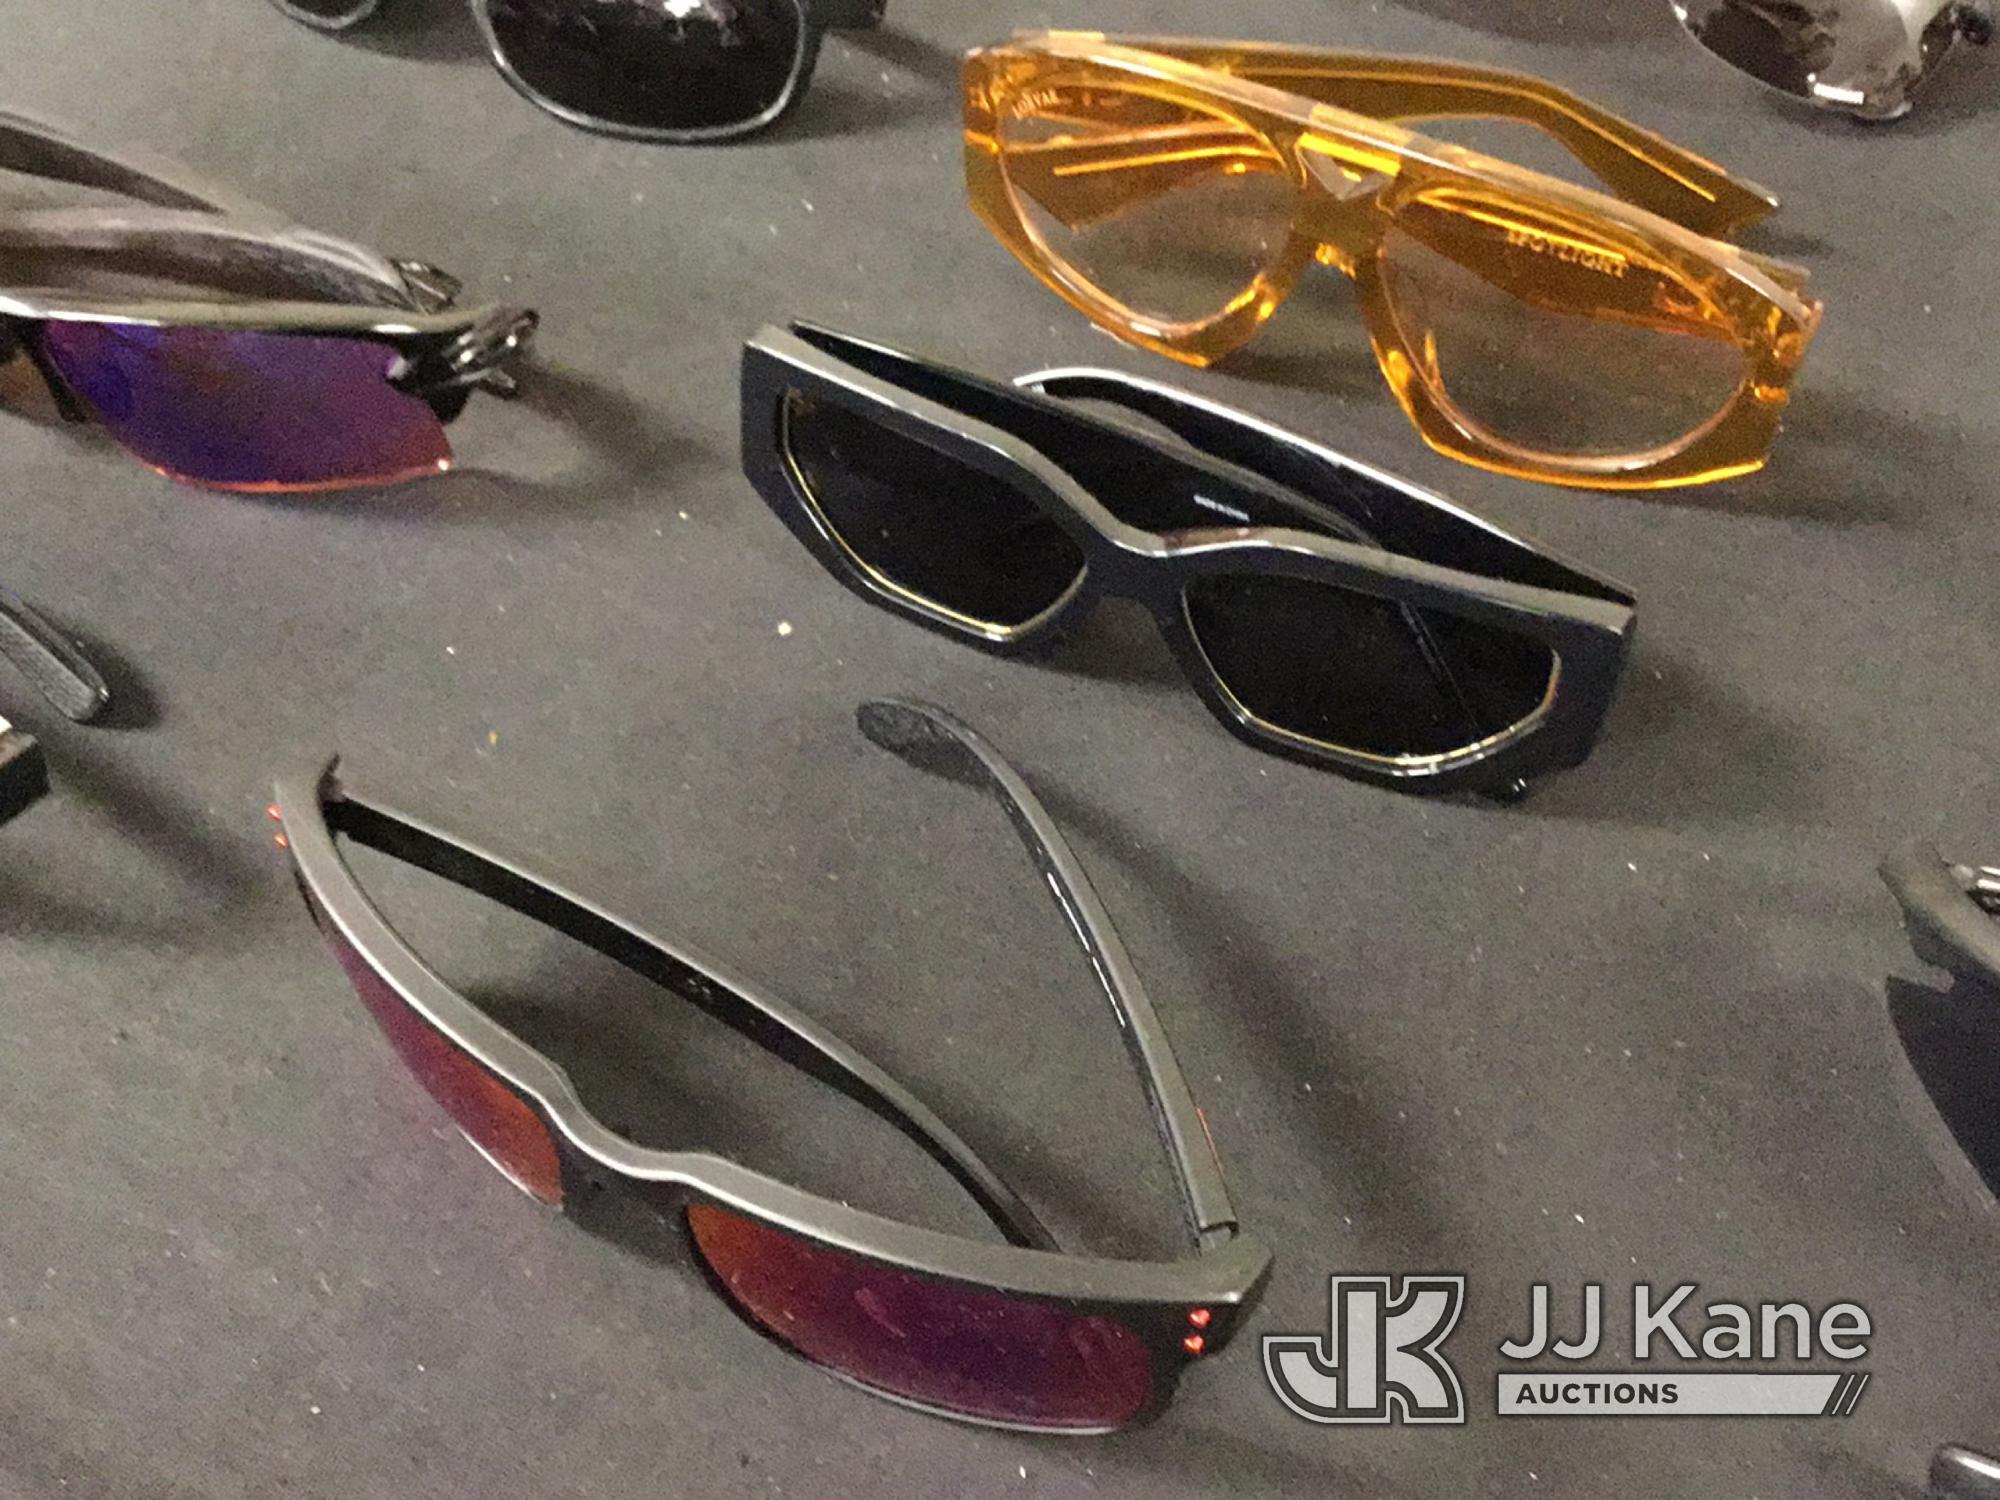 (Jurupa Valley, CA) Sunglasses | cases | authenticity unknown (Used ) NOTE: This unit is being sold